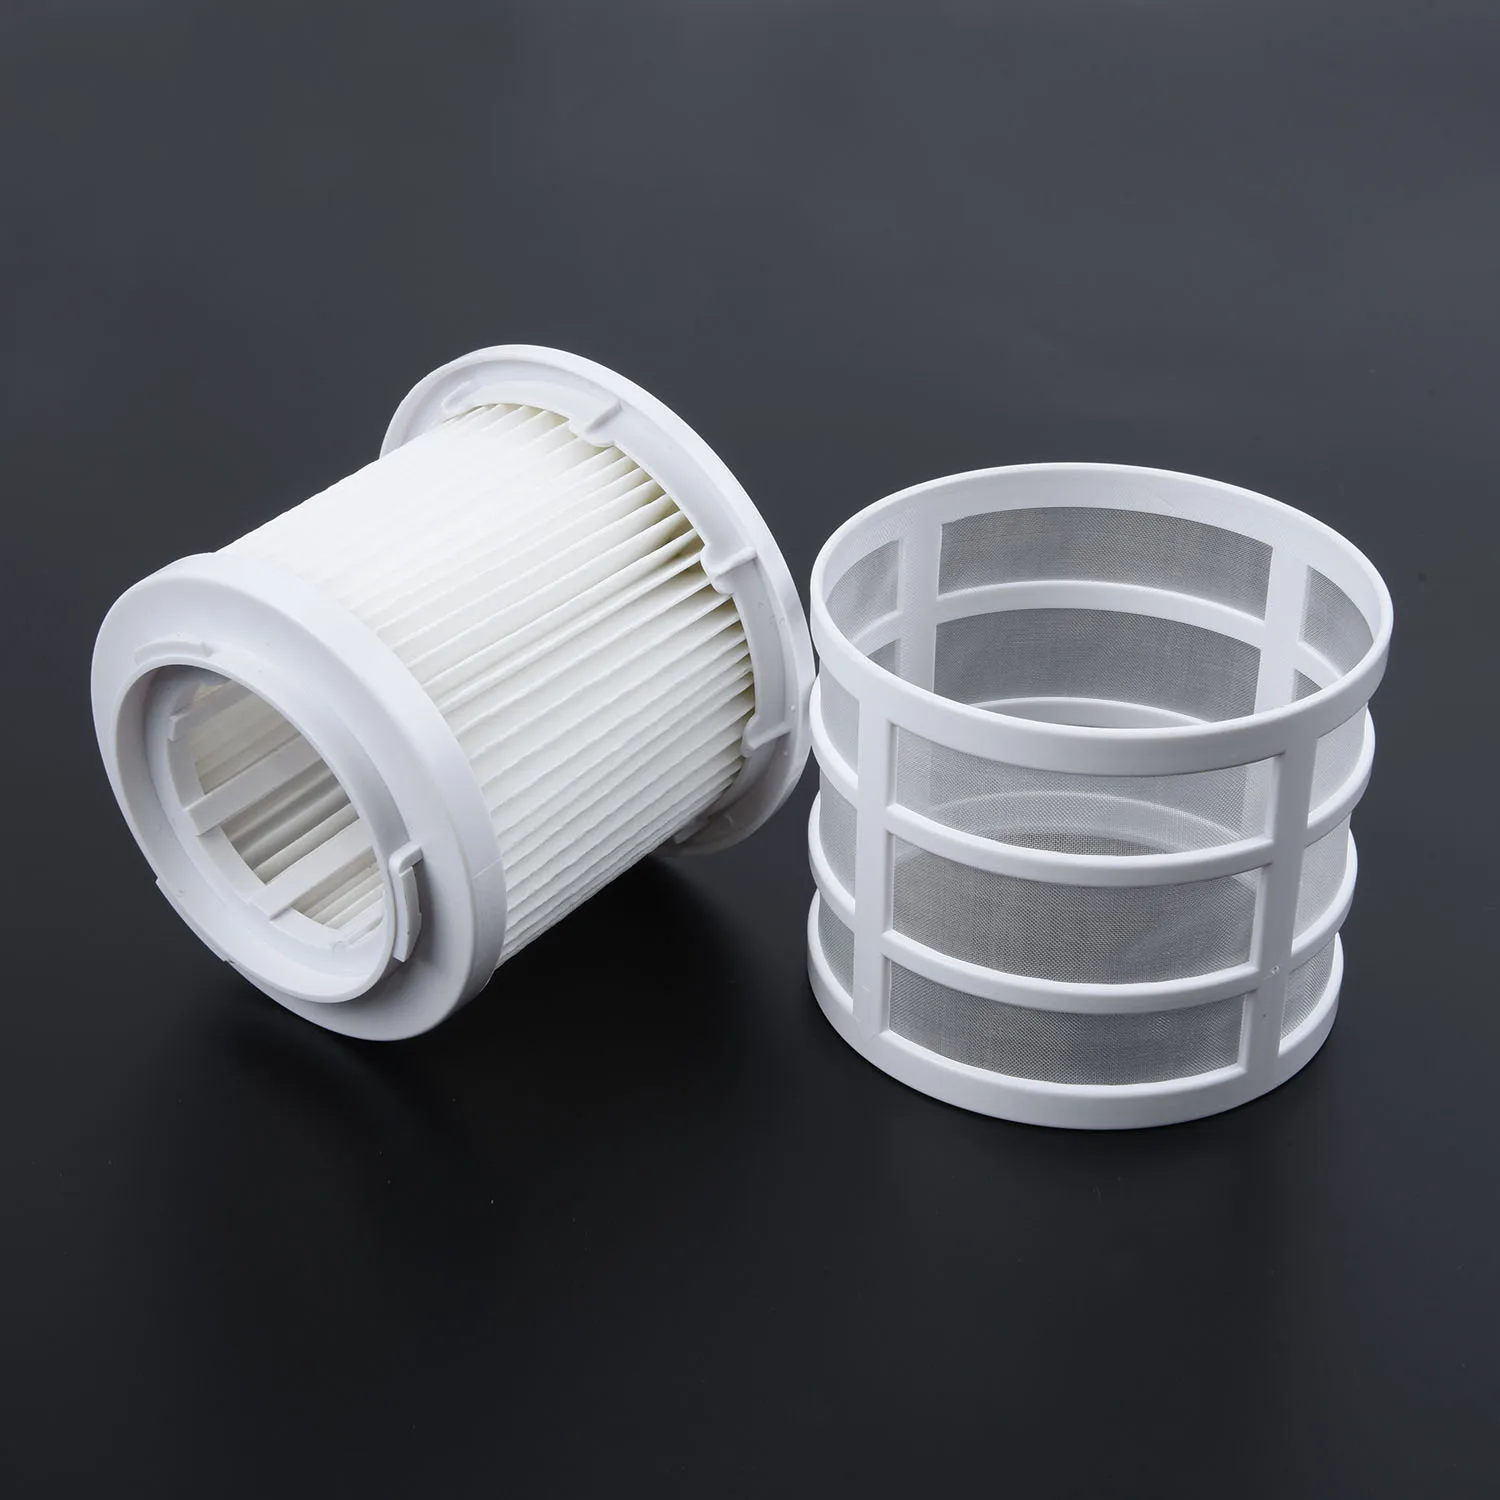 

Vacuum Cleaner Filters 35601328 For Hoover Type U66 Reusable Washable Handheld Vacuum Cleaners Home Cleaning Tool Parts